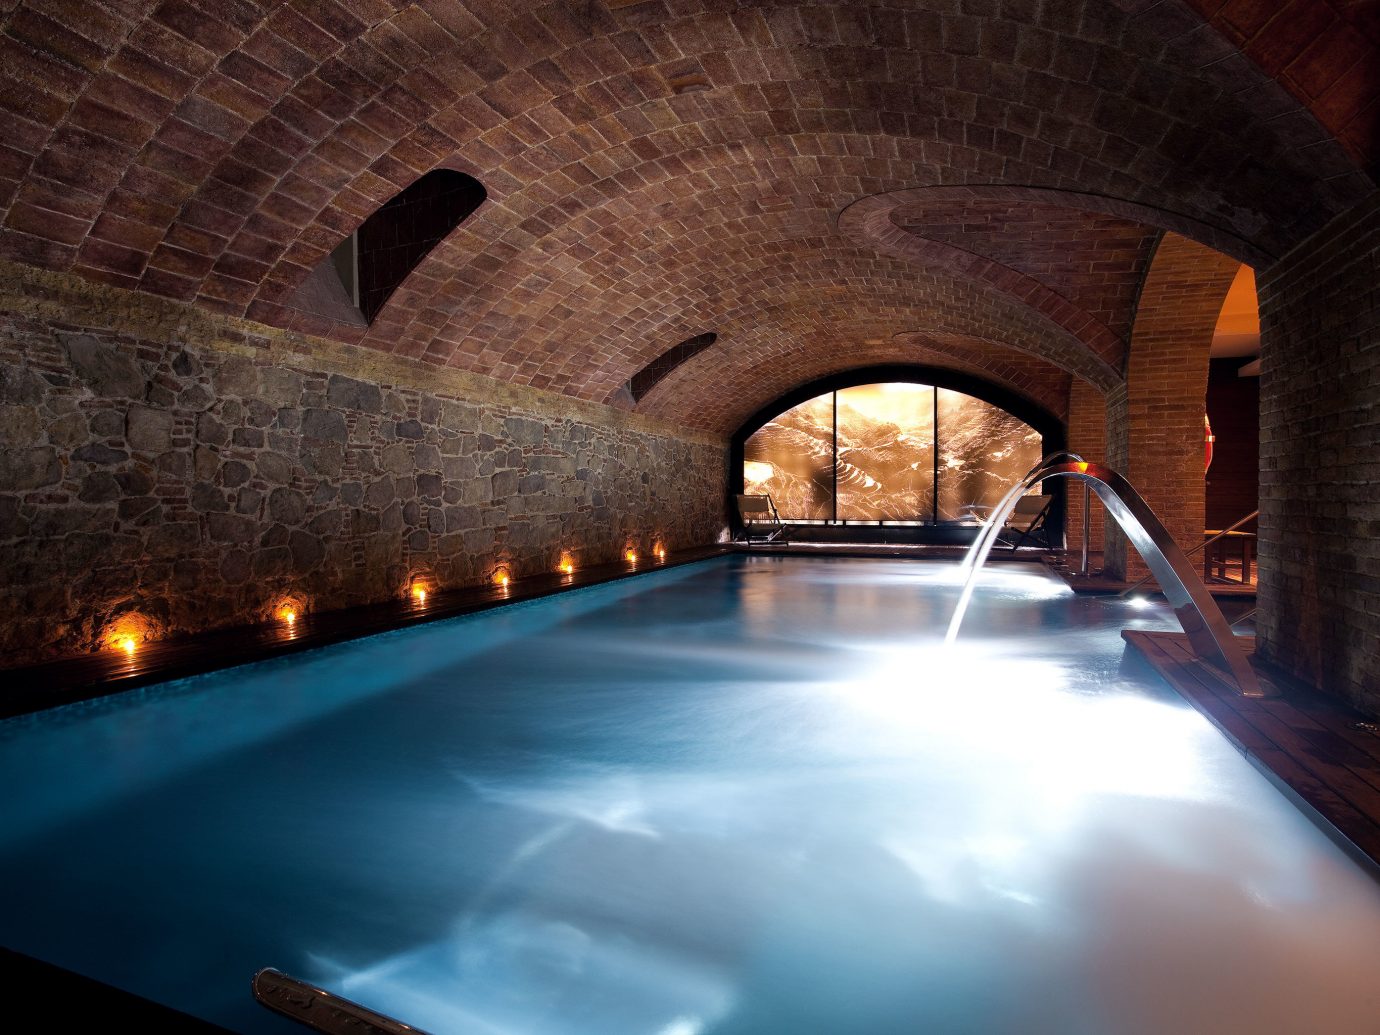 Barcelona Boutique City Hotels Pool Spa Spain building light Architecture night arch stone